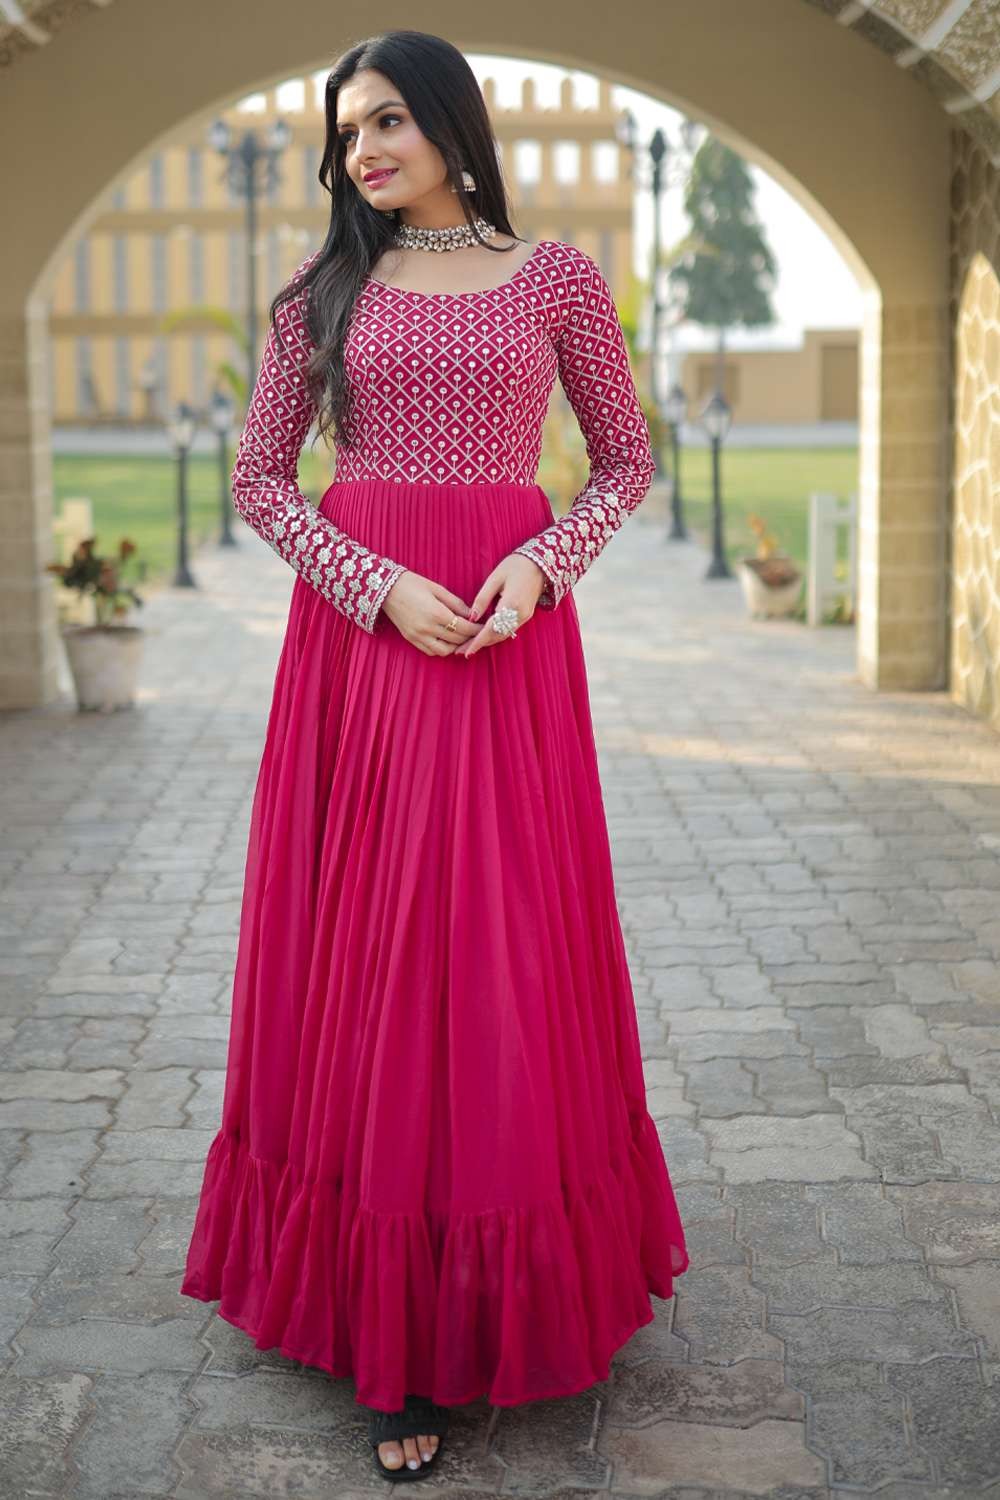 Women Designer Flared Gown With Dupatta Pant Indian Partywear Dress  Stitched | eBay